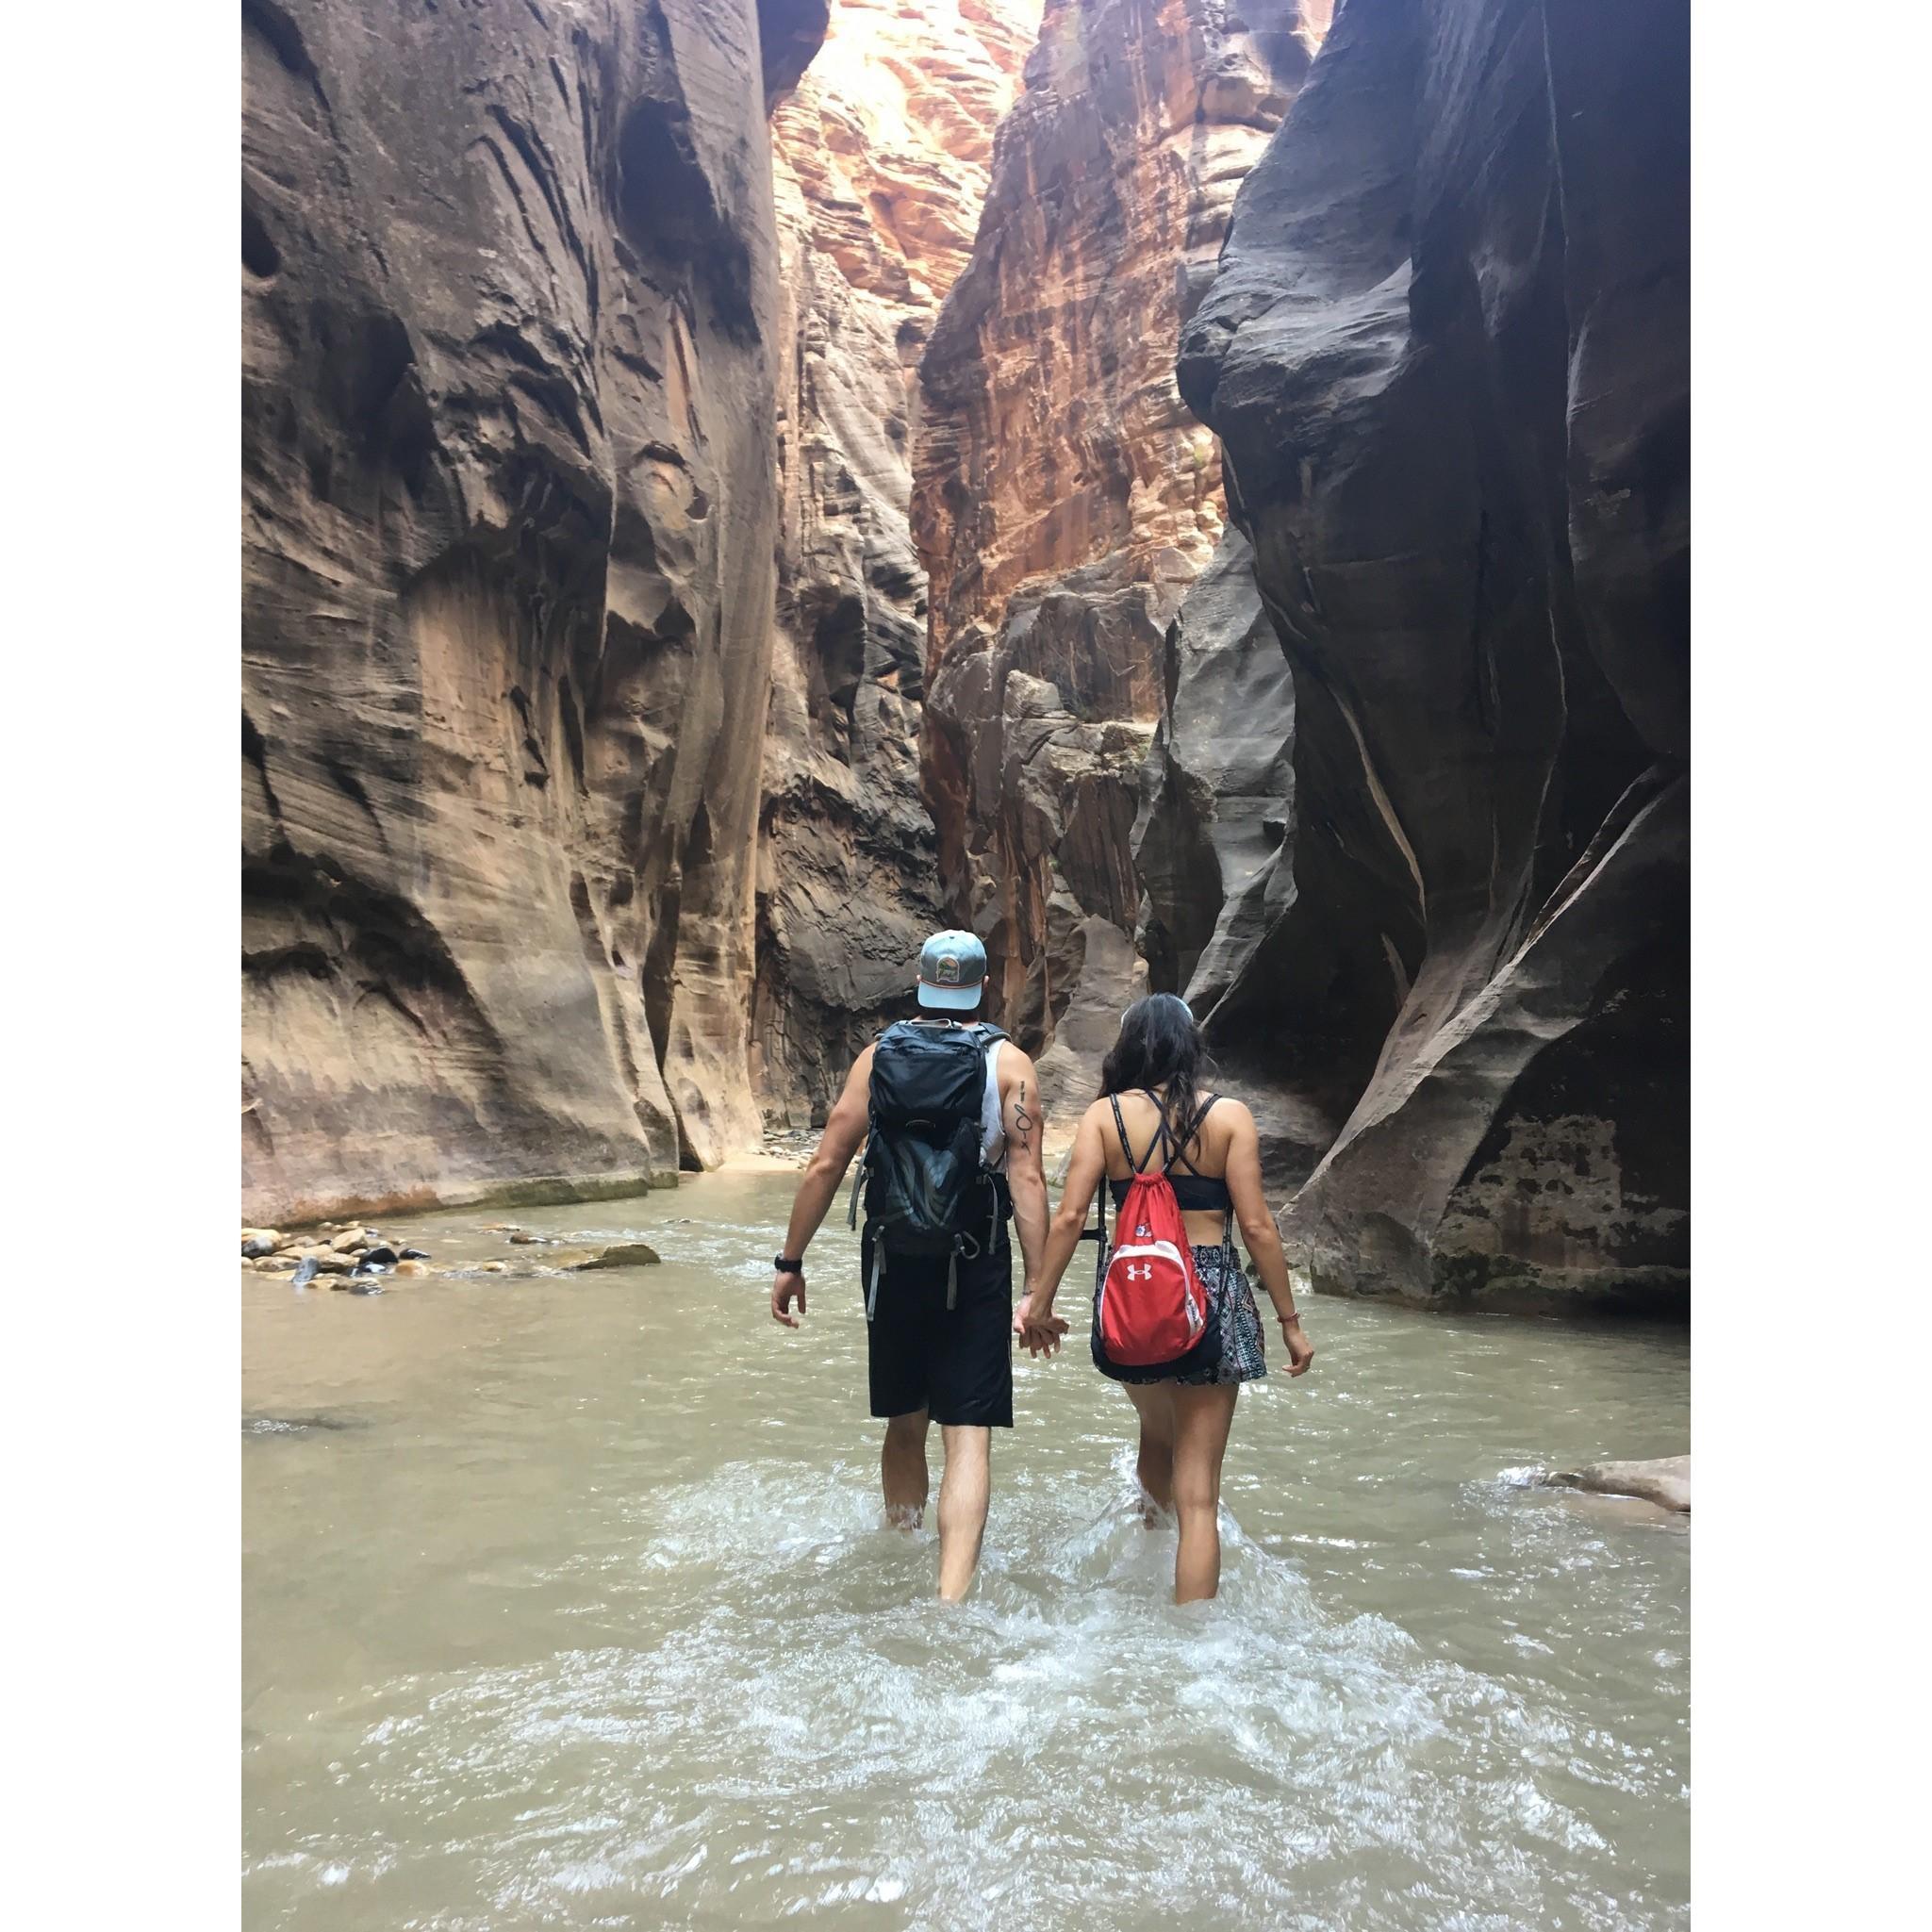 "The Narrows" at Zion National Park